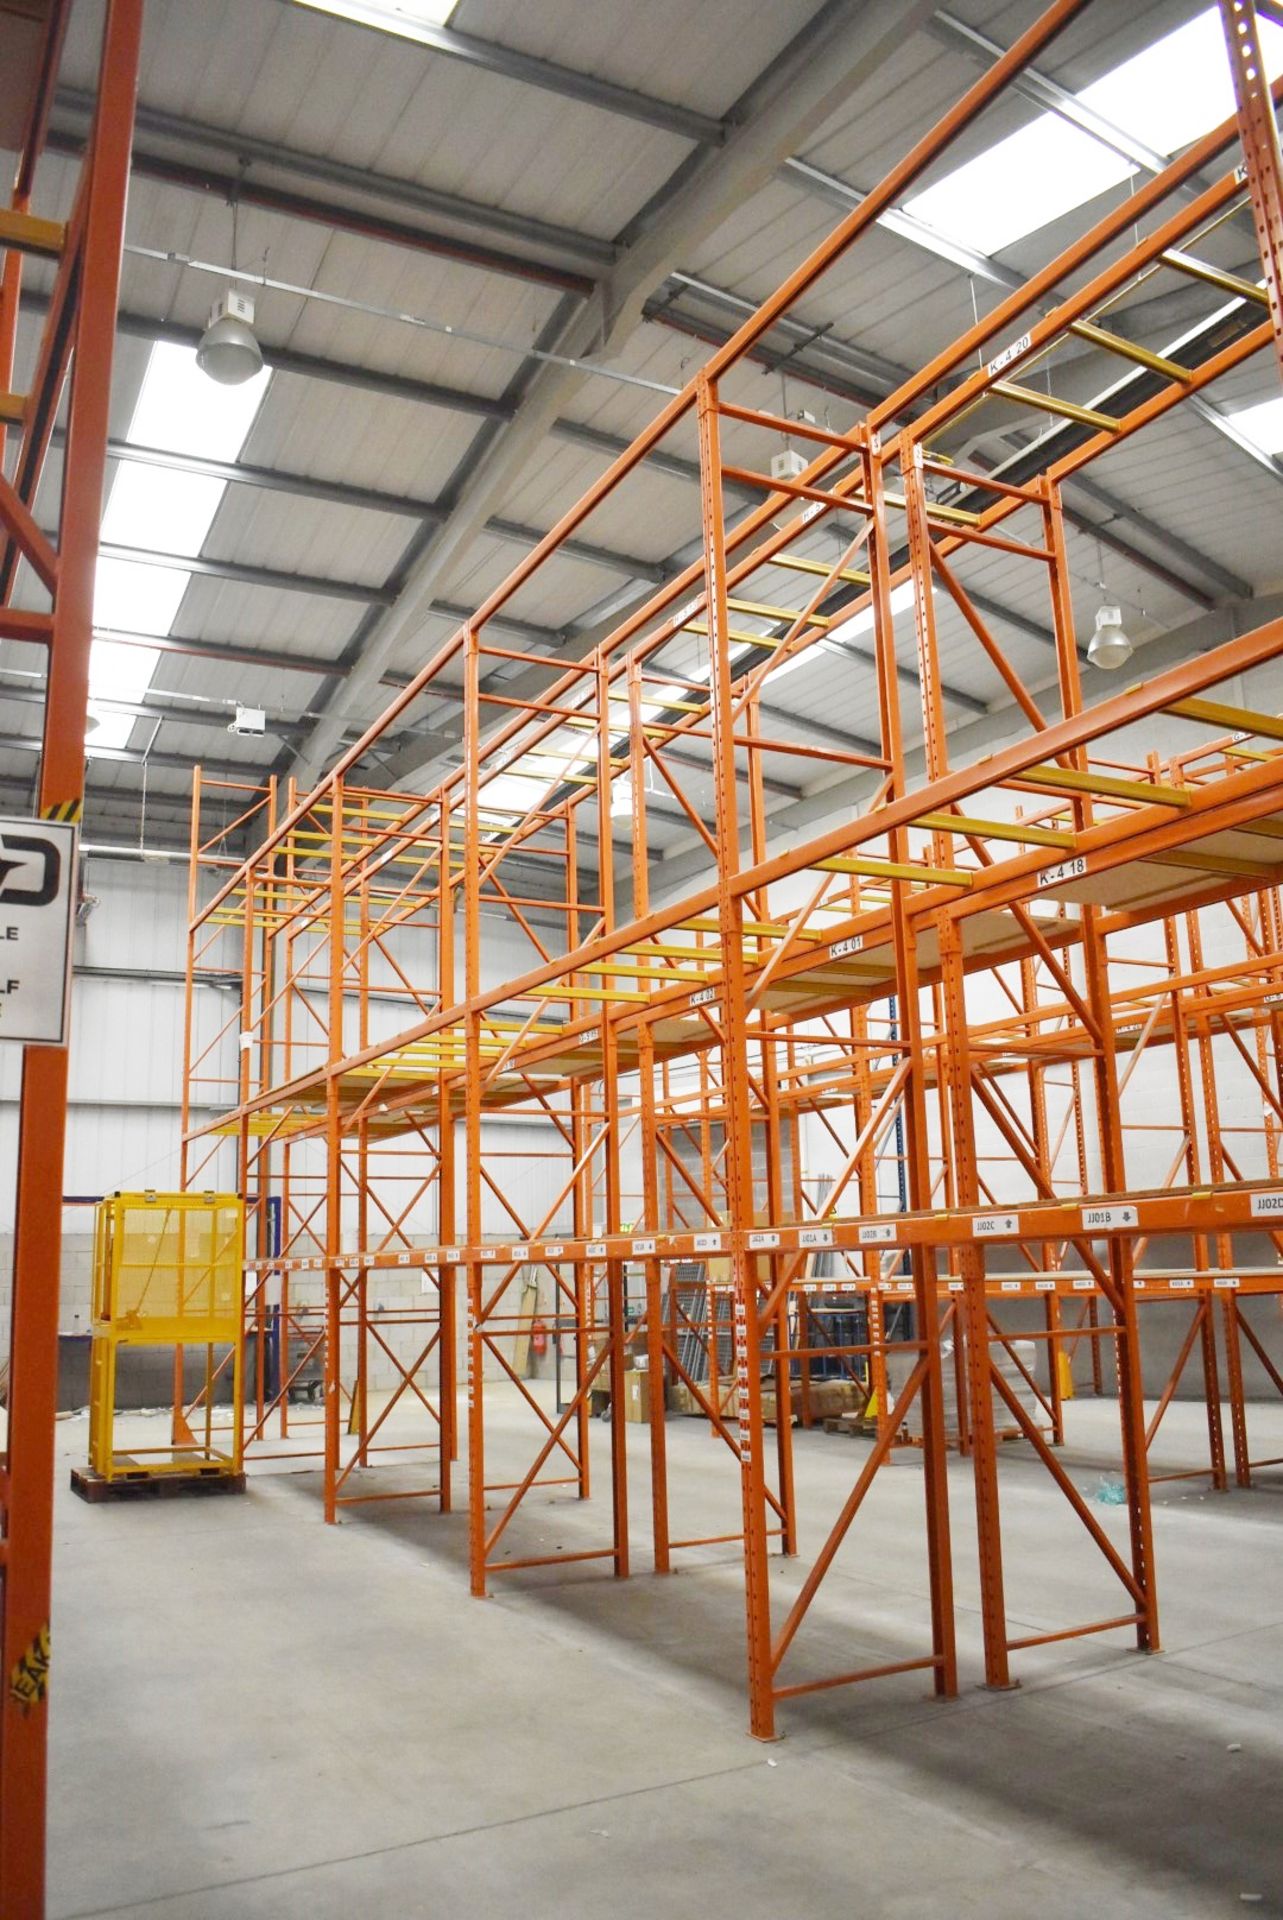 5 x Bays of RediRack Warehouse Pallet Racking - Lot Includes 6 x Uprights and 30 x Crossbeams - - Image 2 of 4